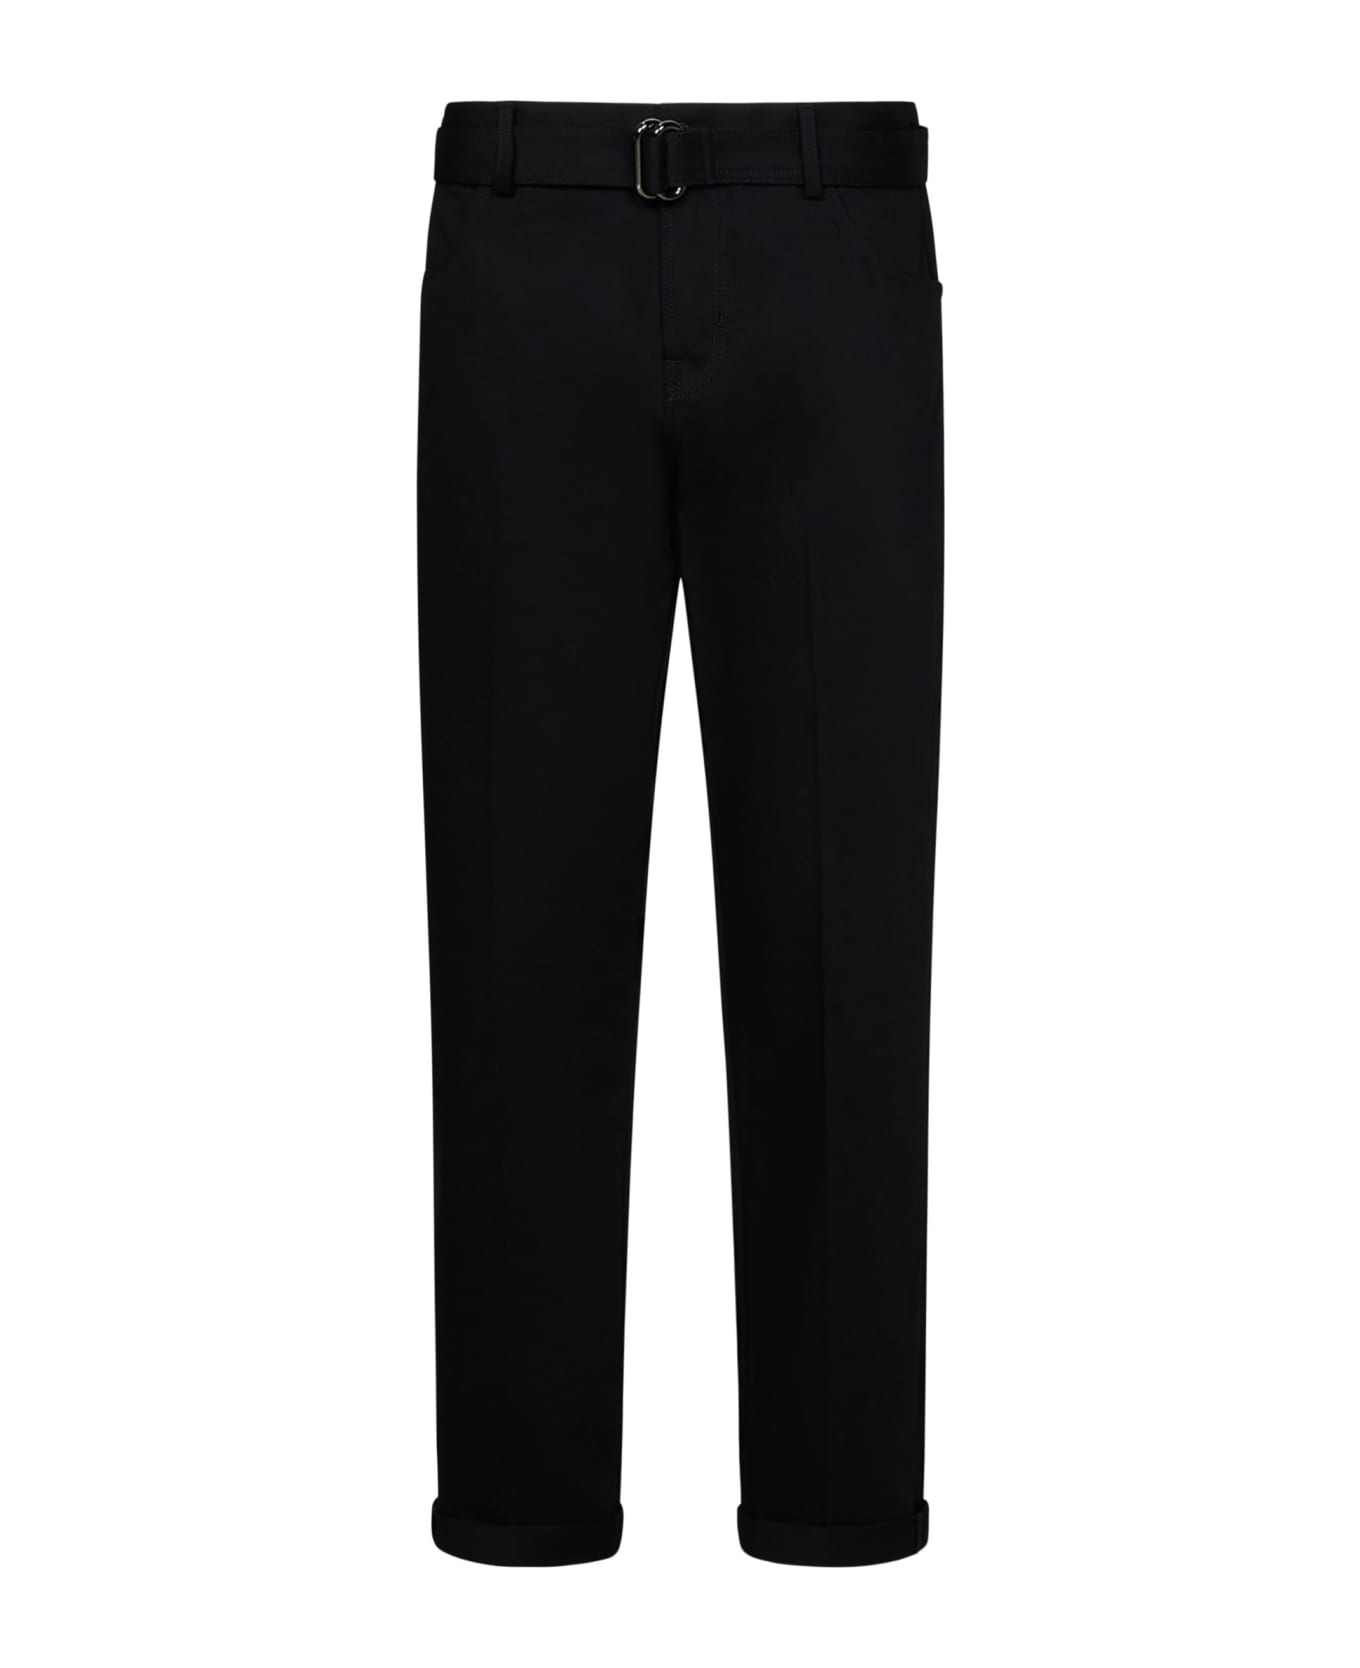 Tom Ford Trousers - Black ボトムス